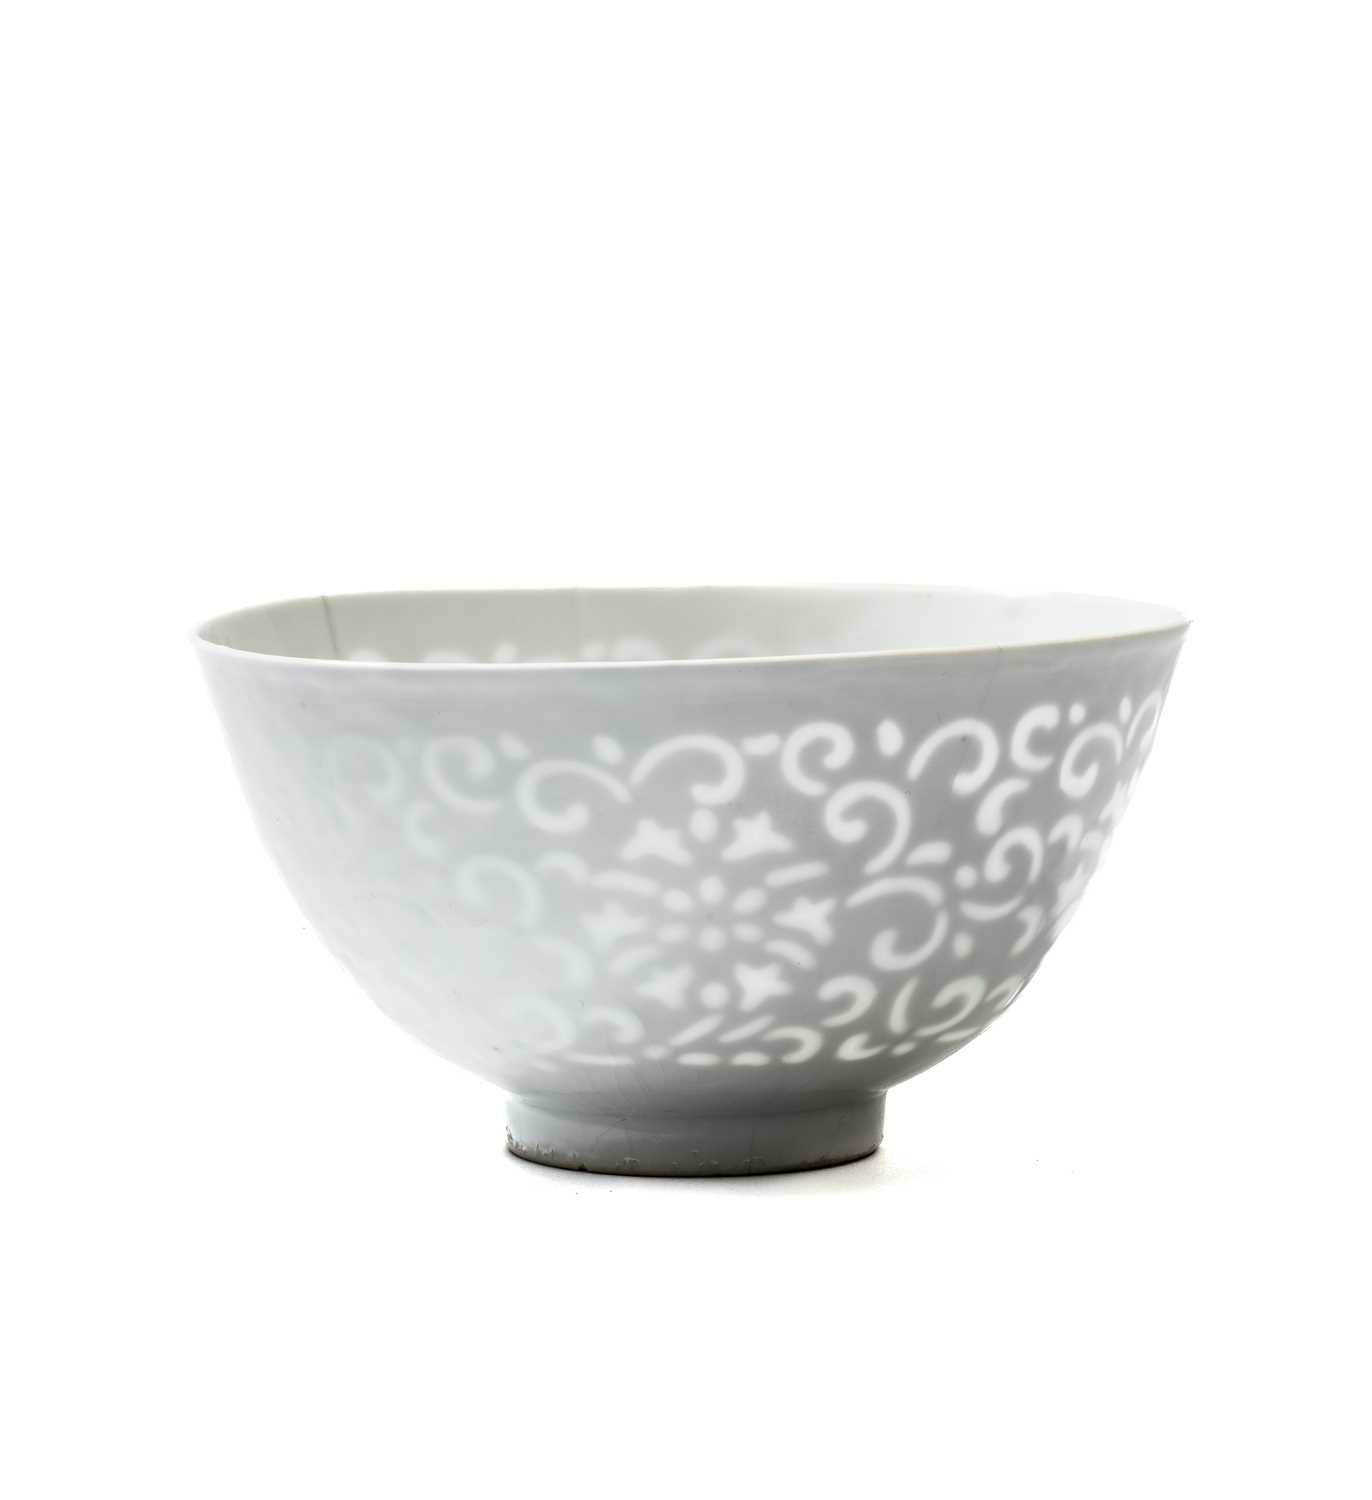 A RARE CHINESE WHITE-GLAZED 'OPEN-WORK' 'LOTUS' BOWL, QING DYNASTY (1644-1911)